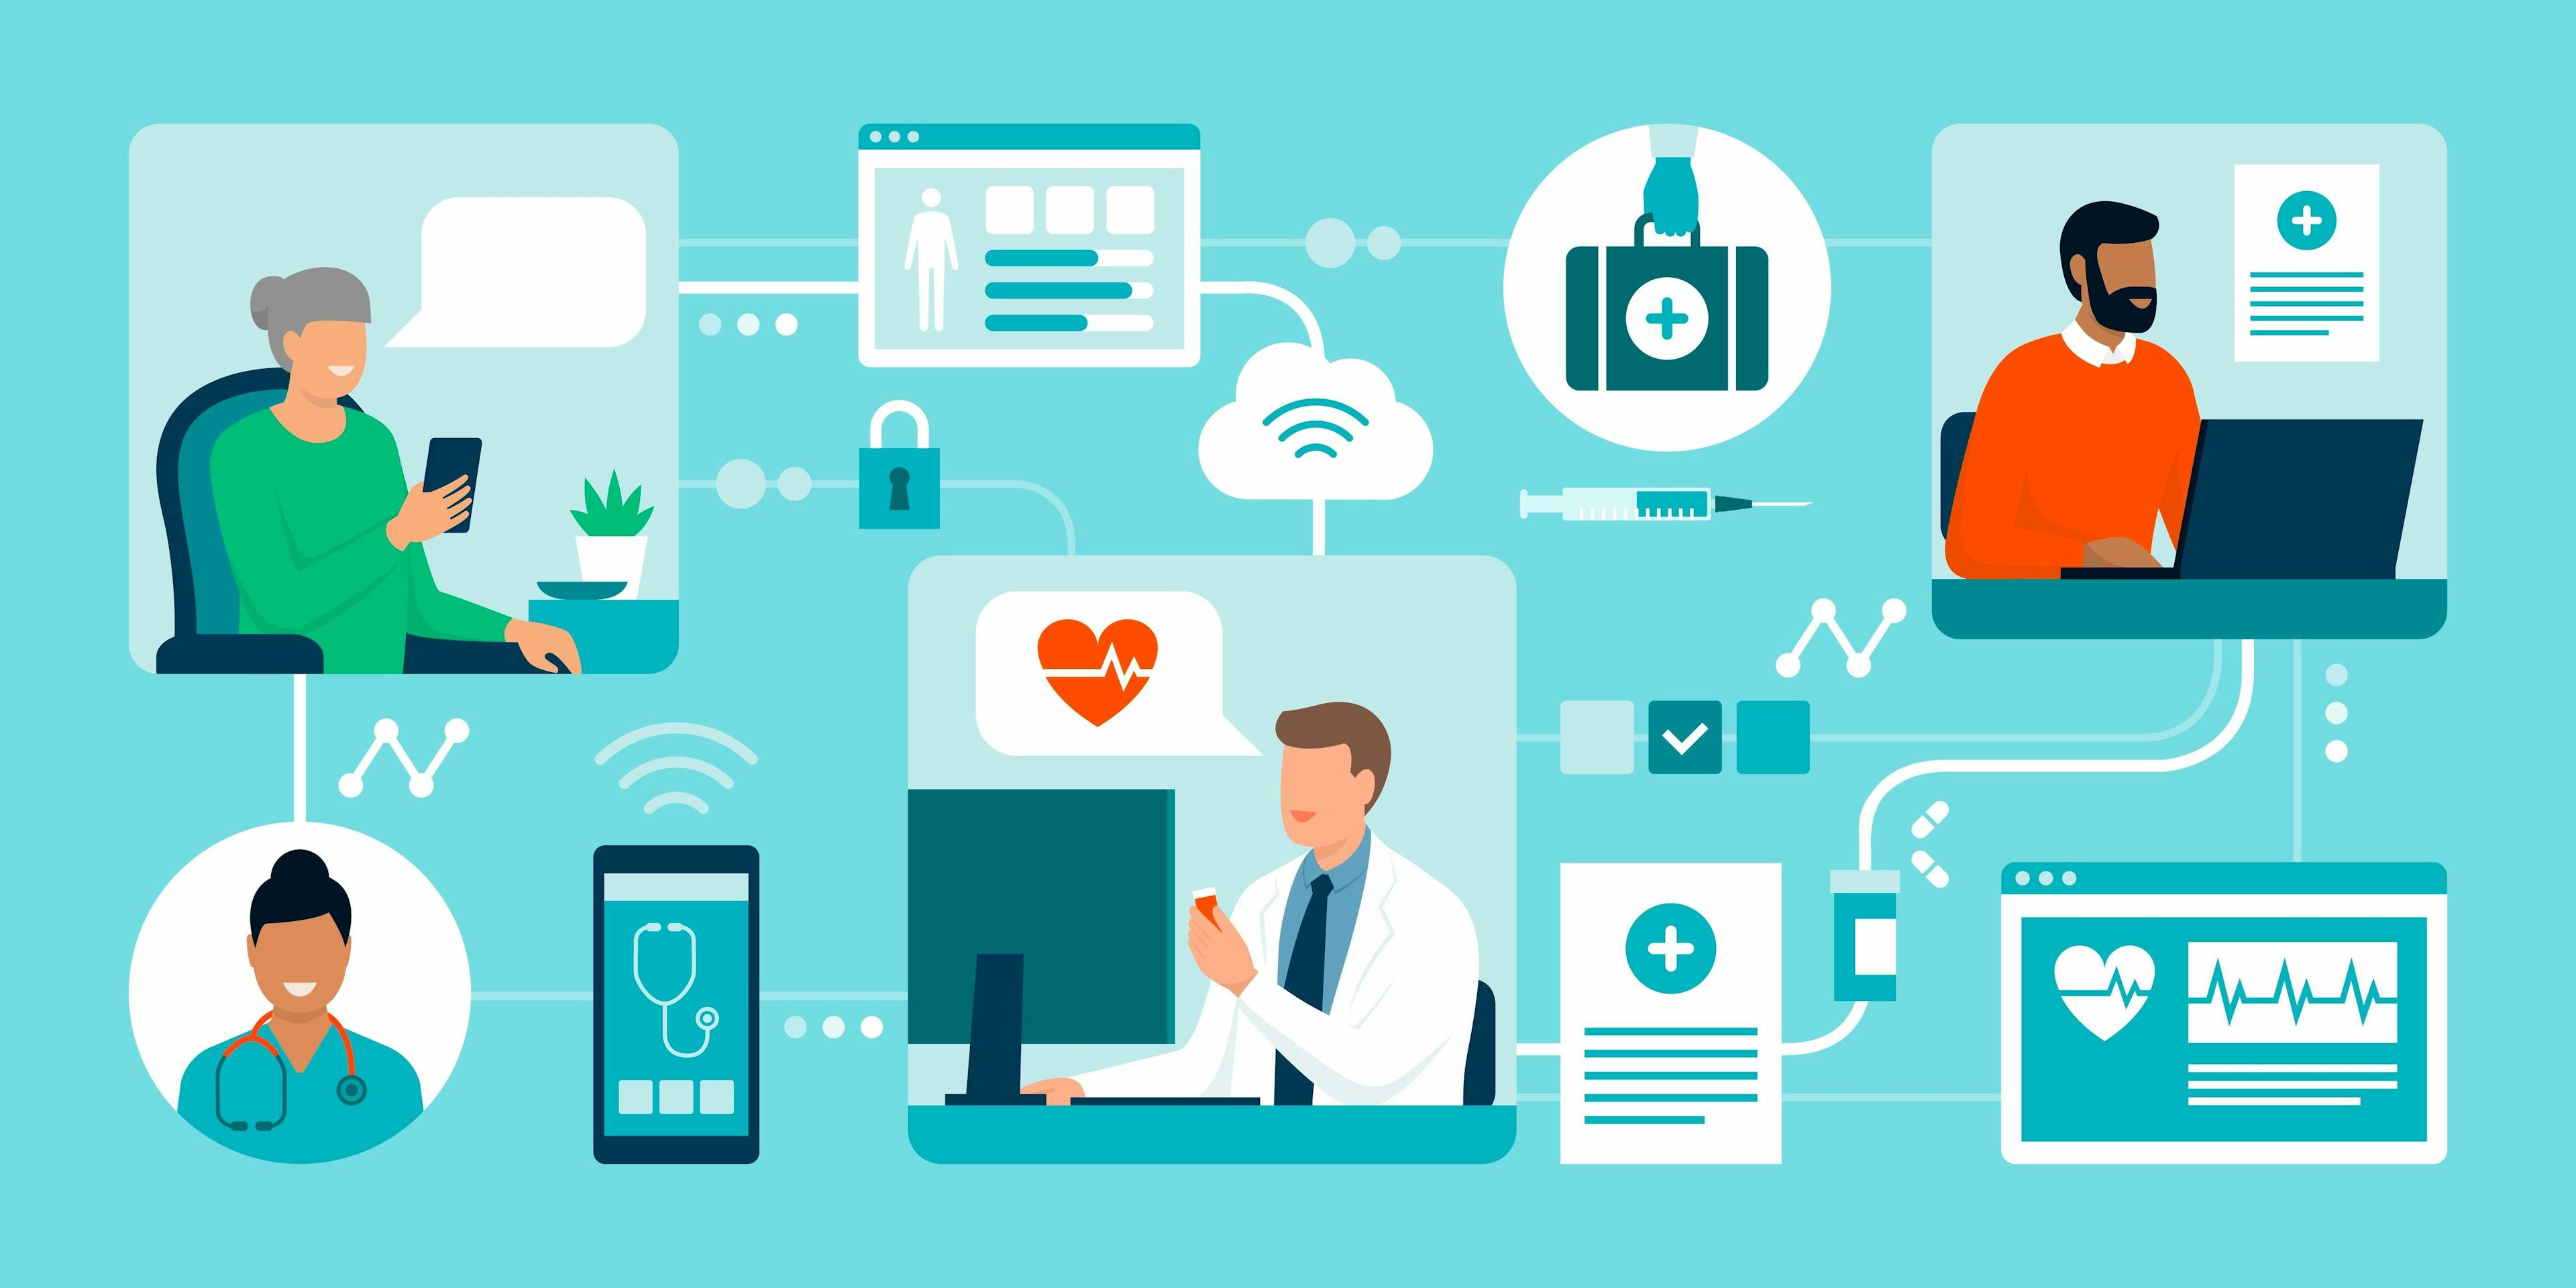 One of the most significant impacts of AI and data analytics in health care is the ability to offer personalized patient care. Image Credit: © elenabsl - stock.adobe.com
